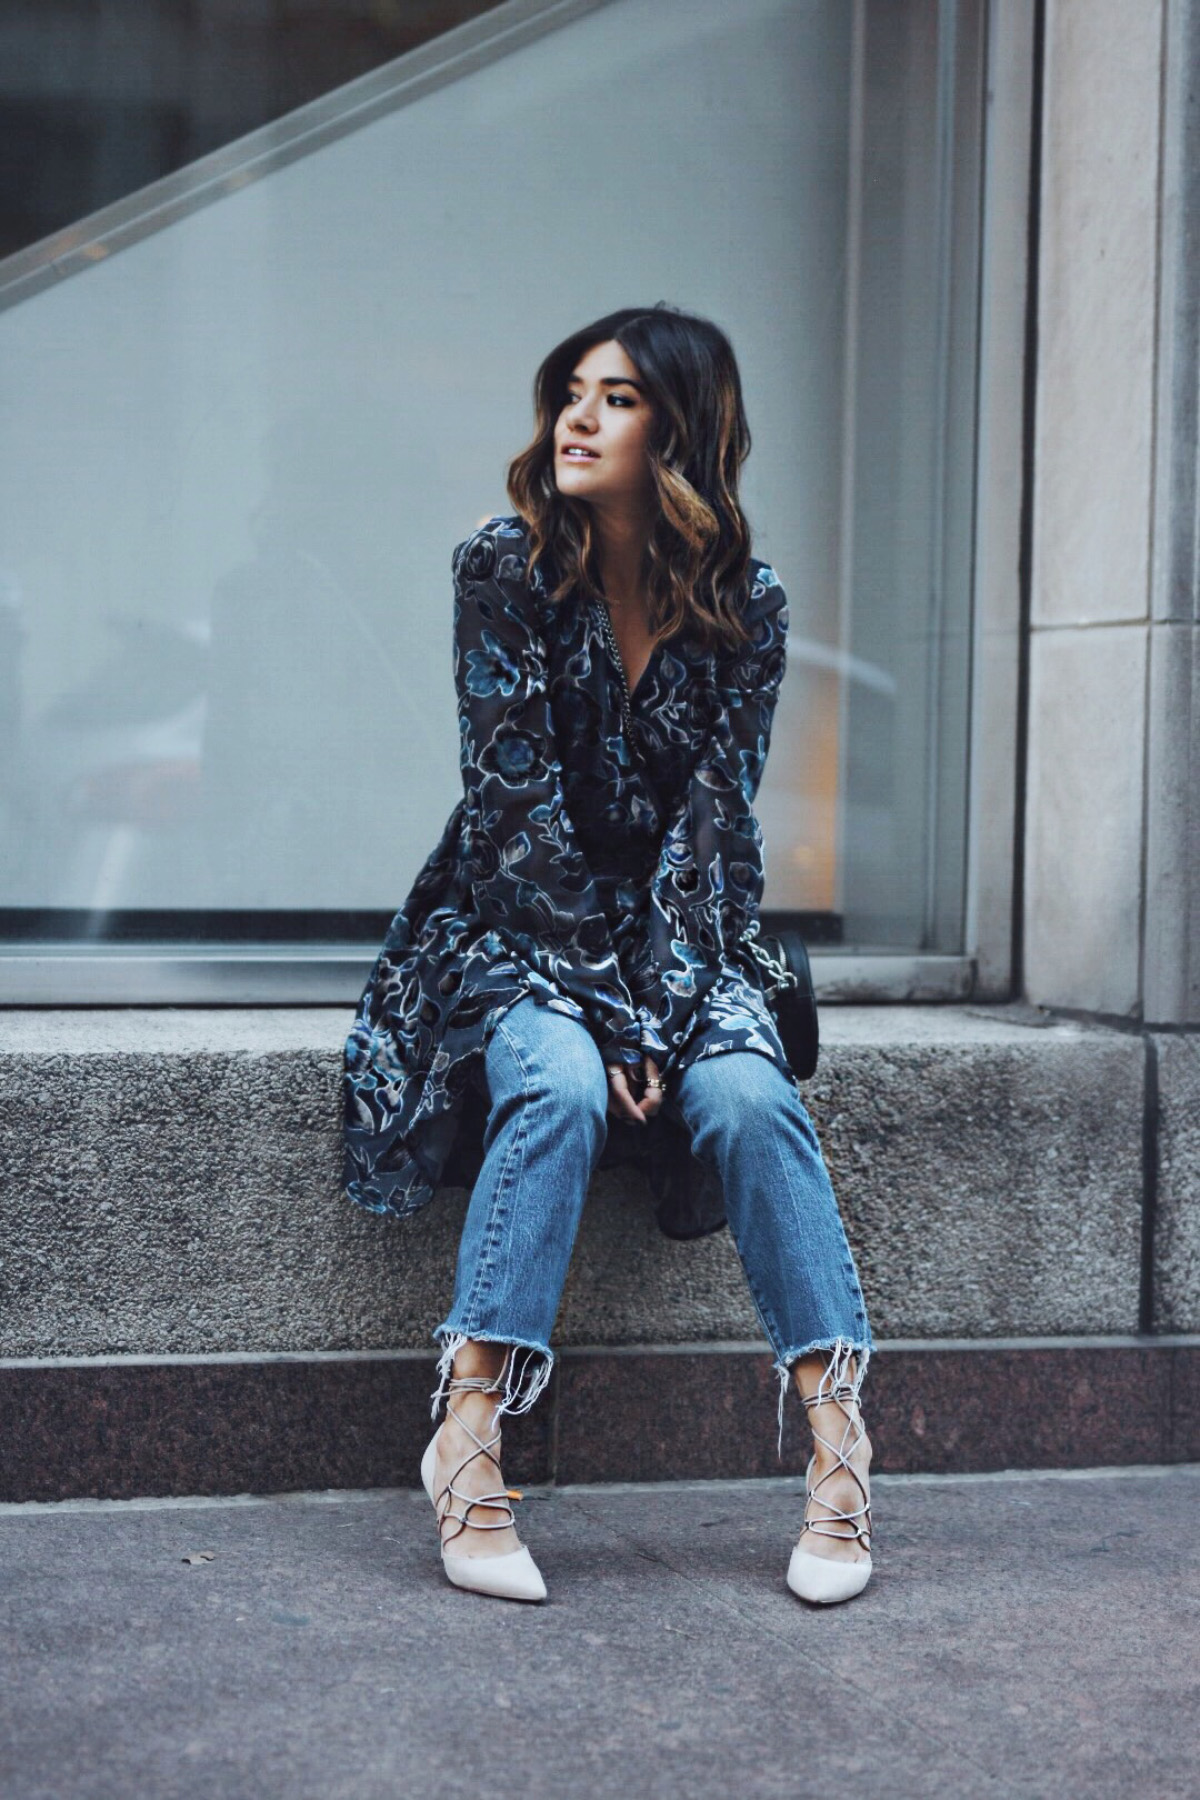 Carolina Hellal of Chic Talk wearing Band of Gypsies velvet dress, levi's straight jeans and Nine West pumps